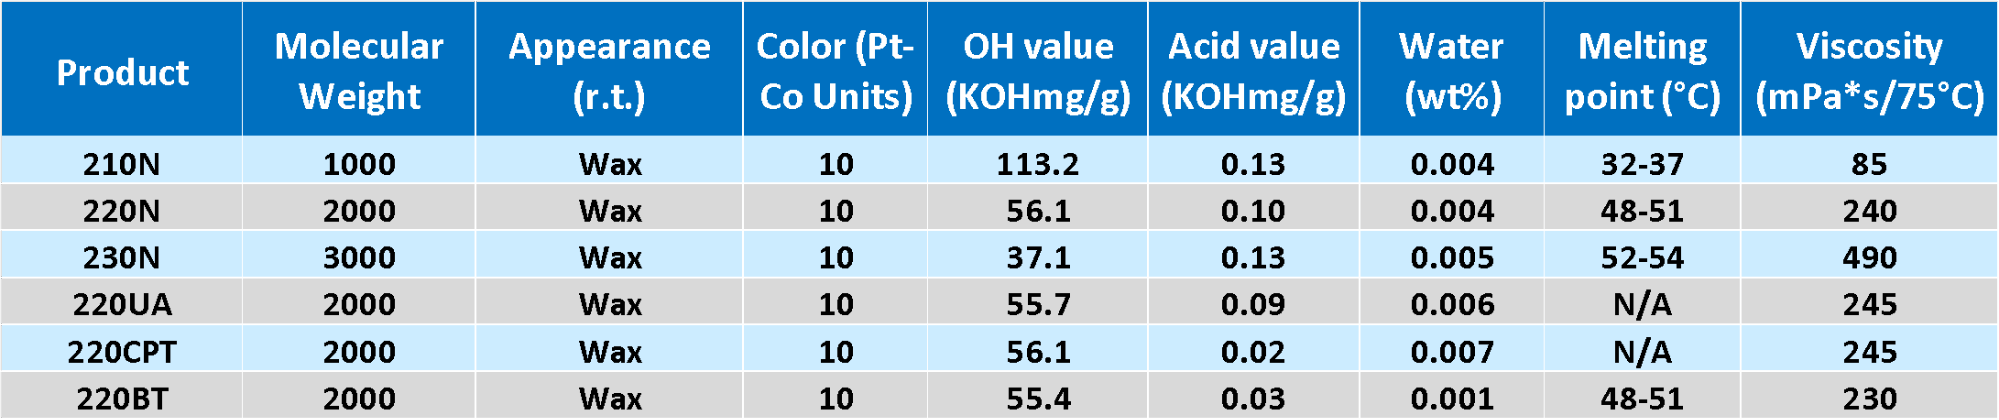 commercial series of N-grade polycaprolactone polyols